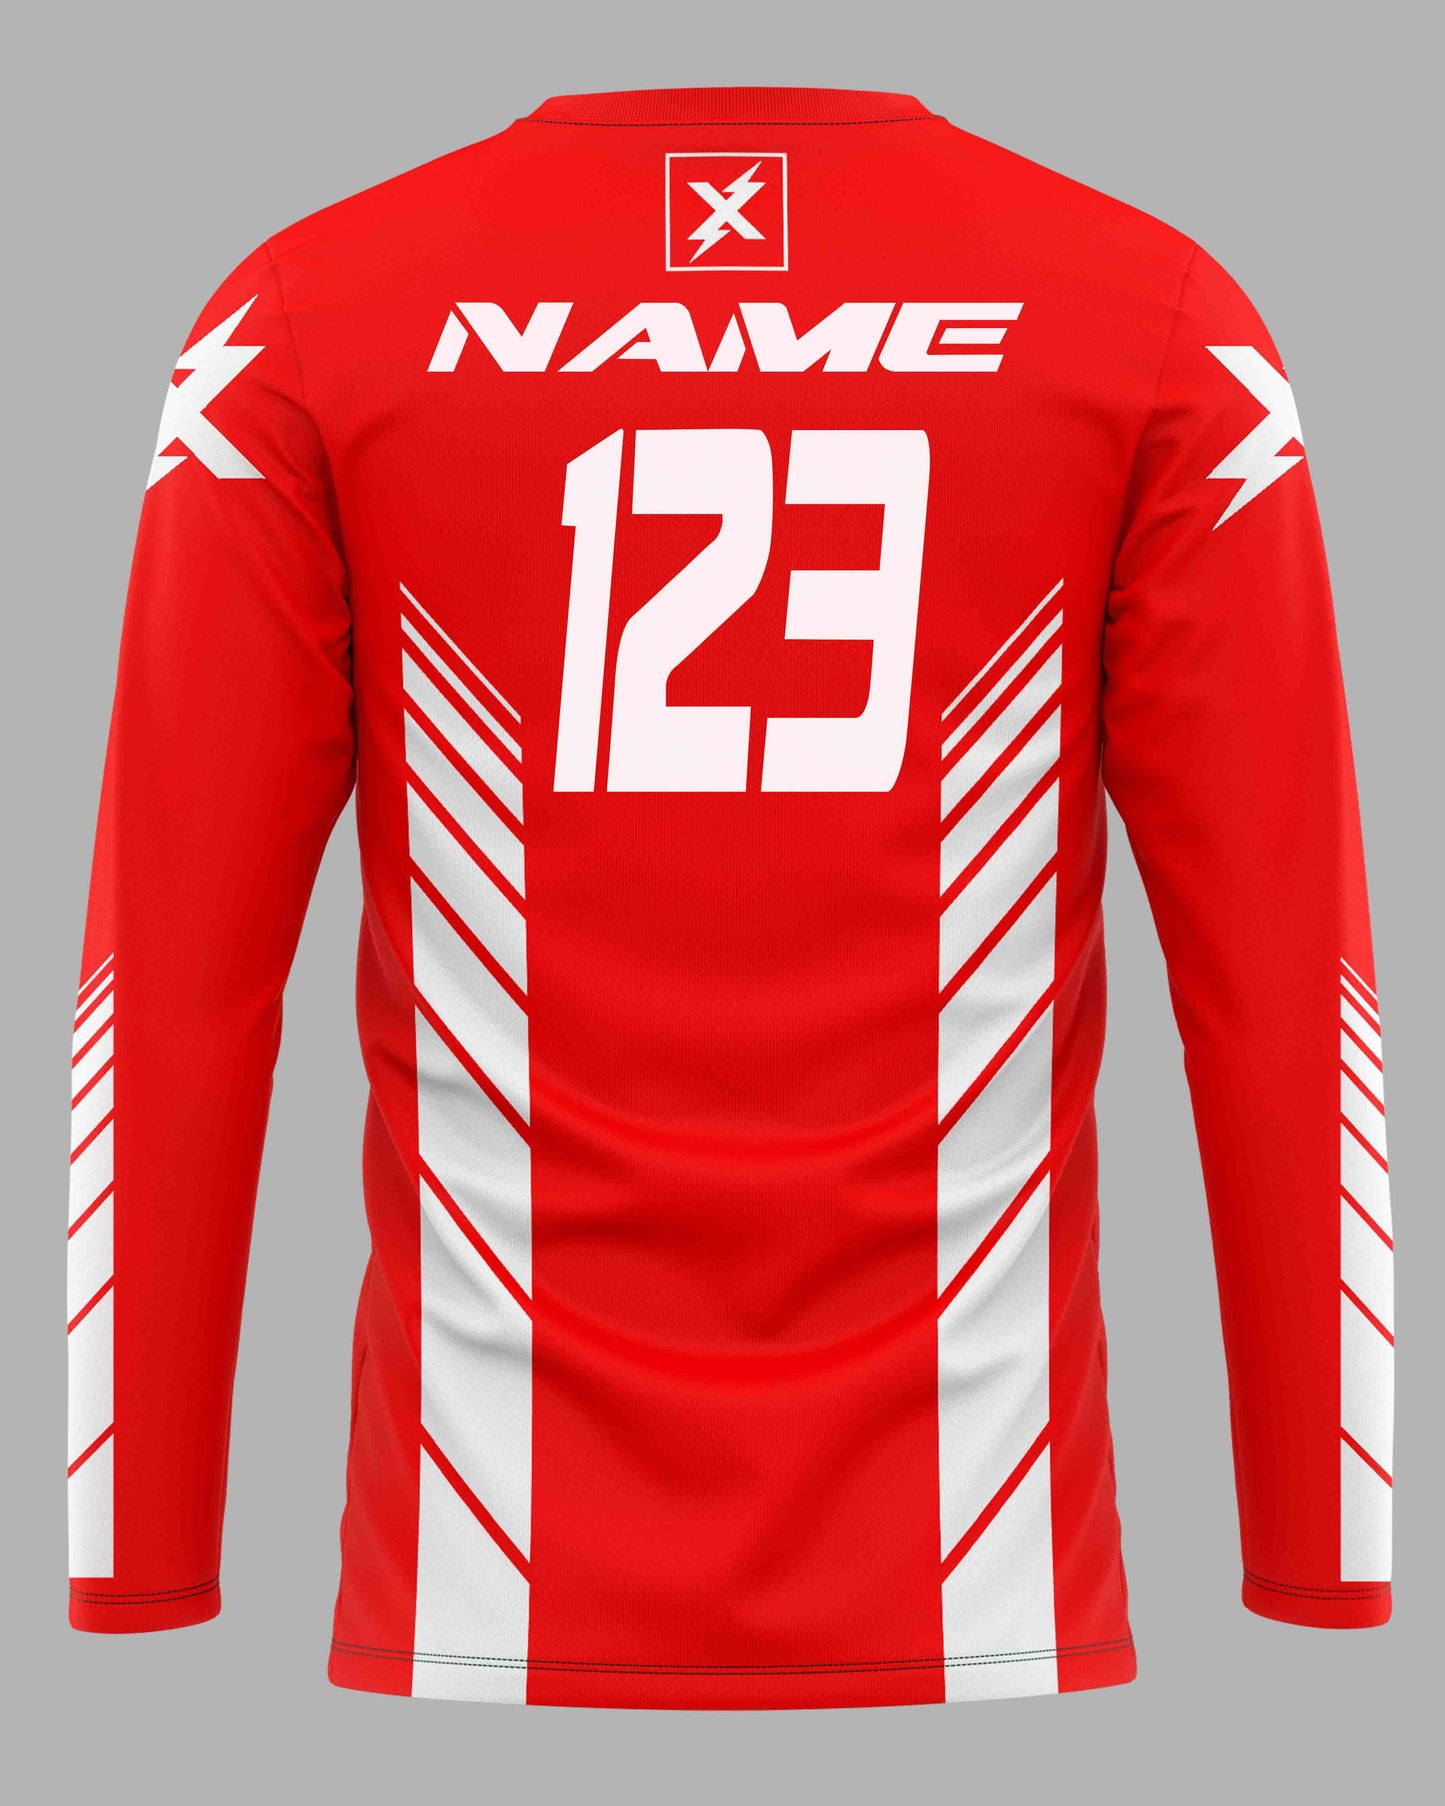 Speed Lines Red Set - FREE Custom Sublimation